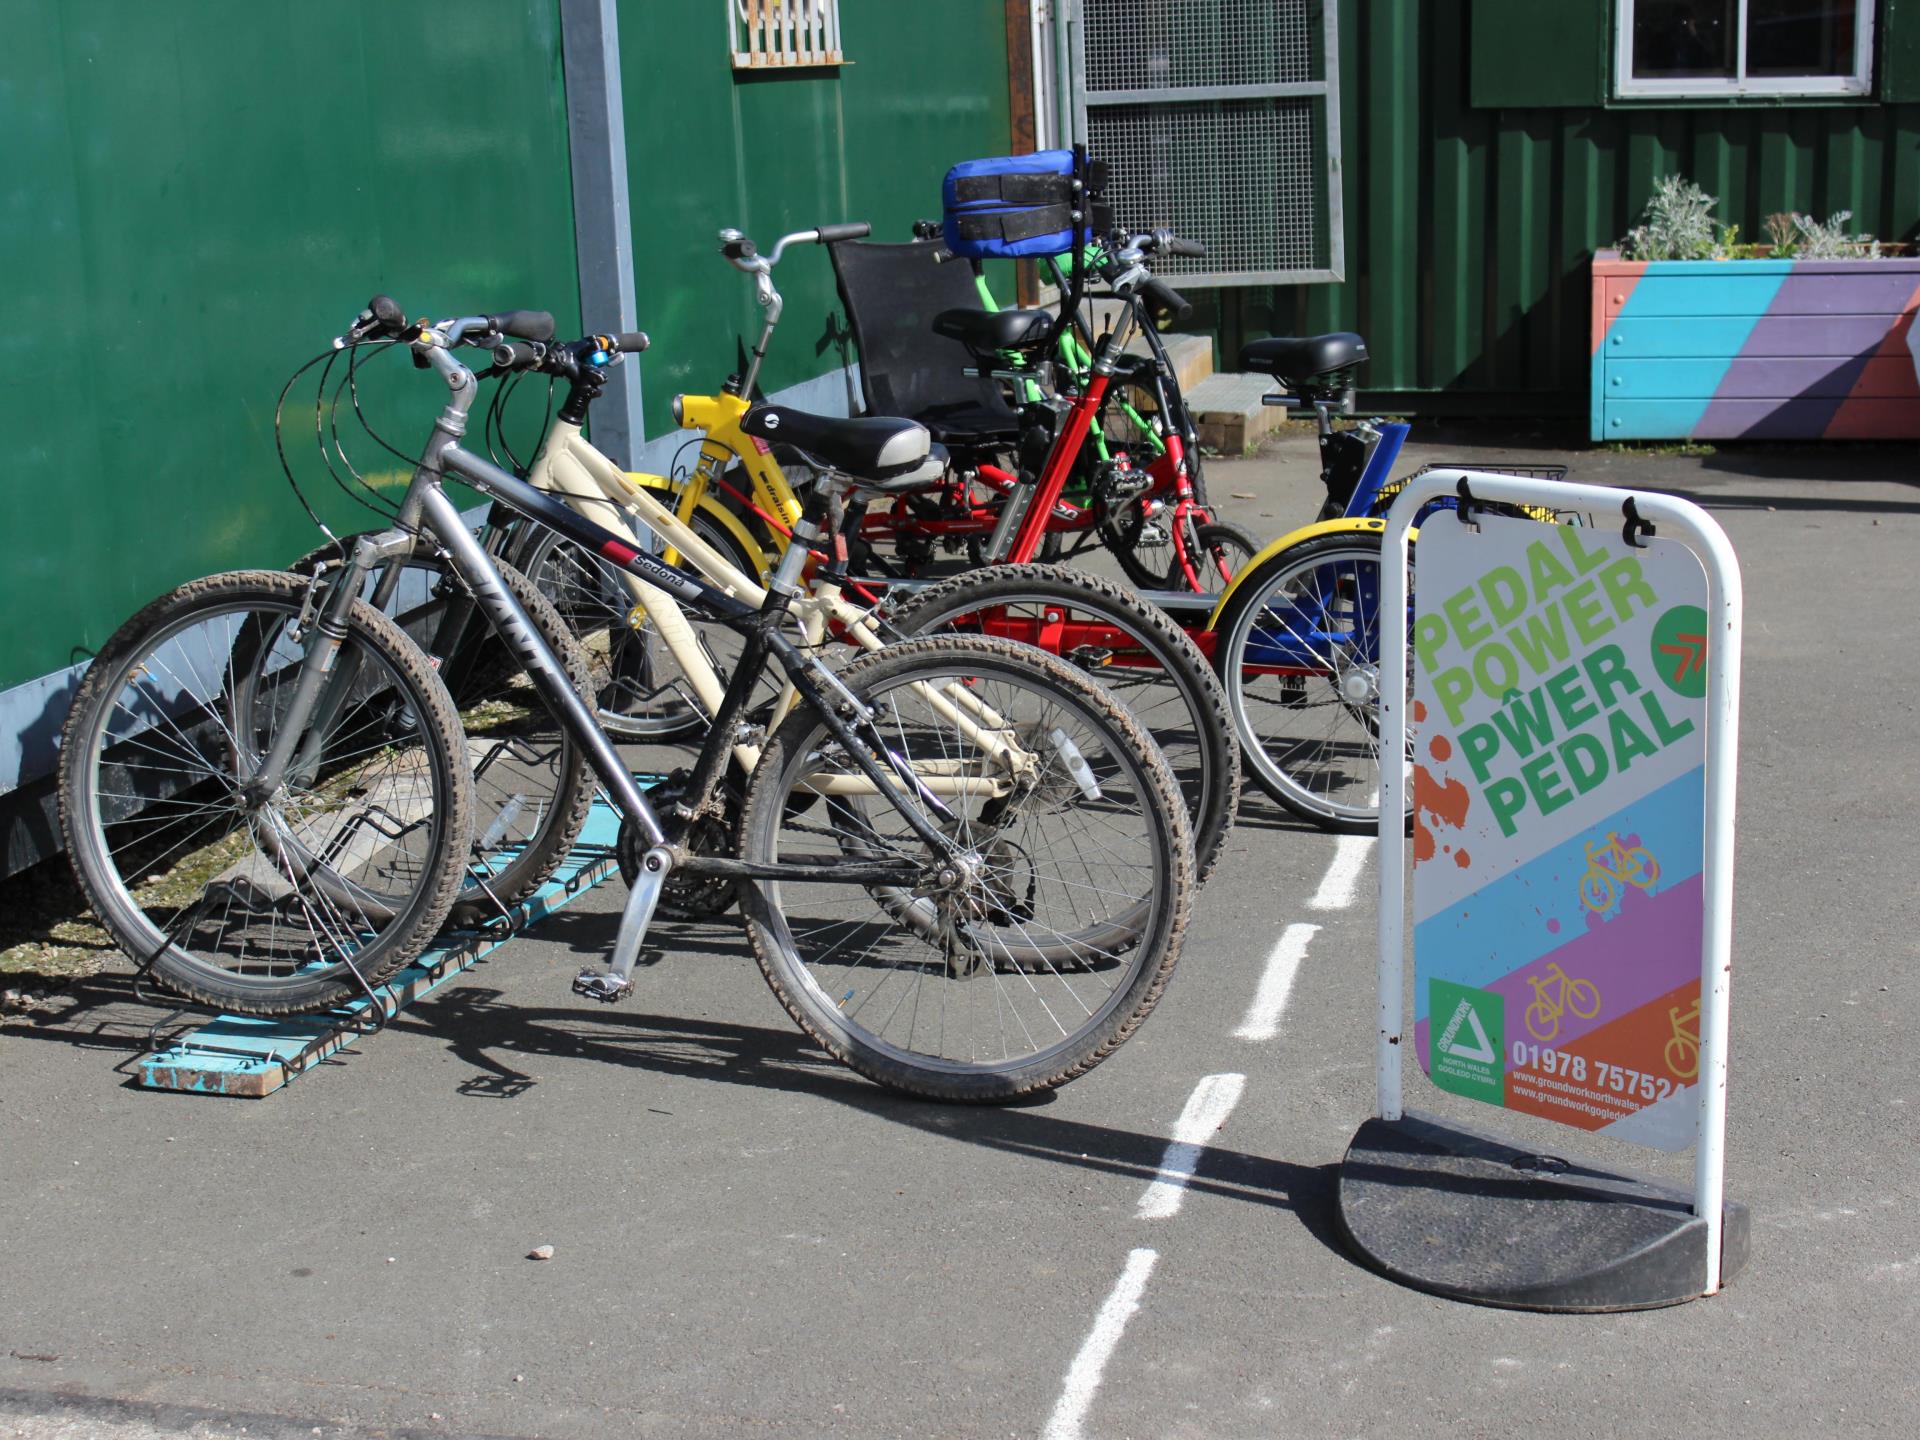 Bike Hire at Pedal Power 